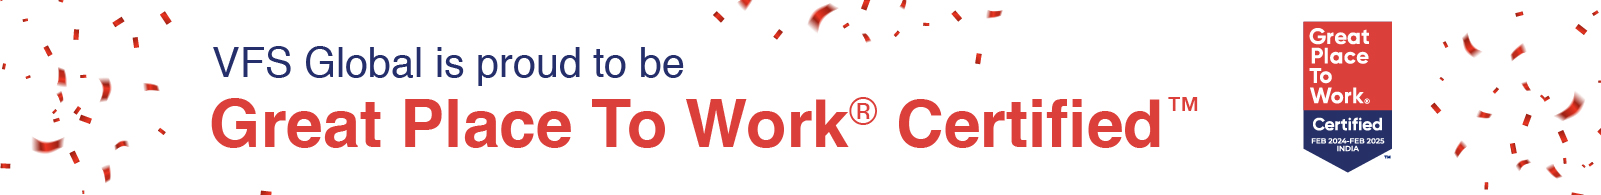 Great Place to Work® Certification